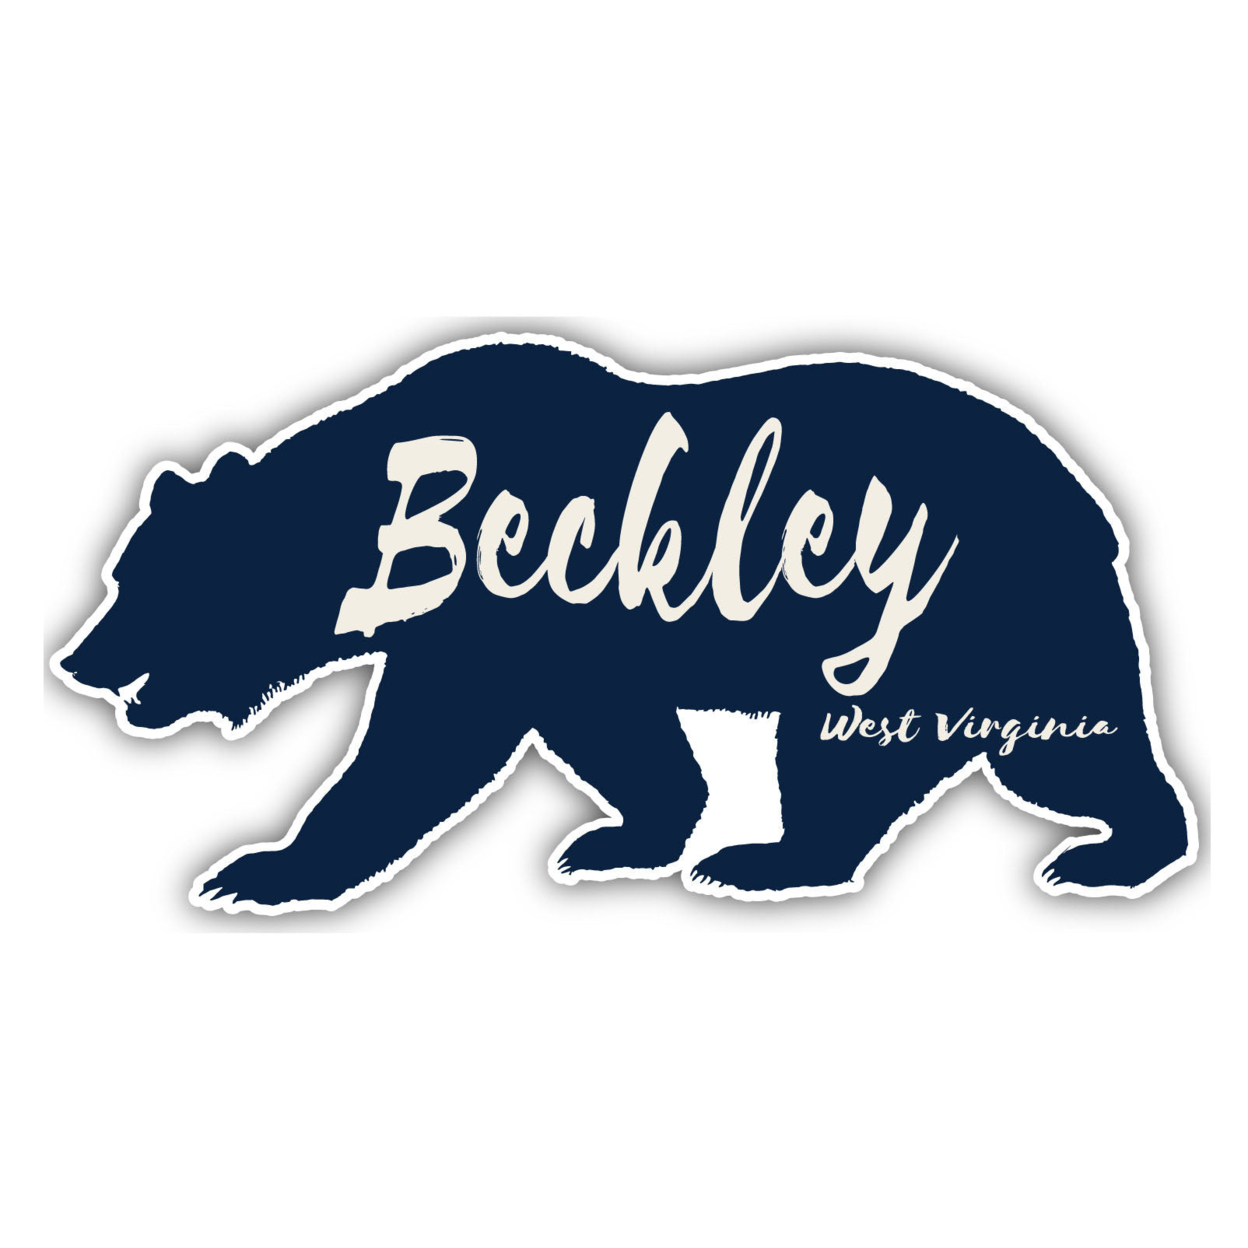 Beckley West Virginia Souvenir Decorative Stickers (Choose Theme And Size) - 4-Pack, 8-Inch, Adventures Awaits